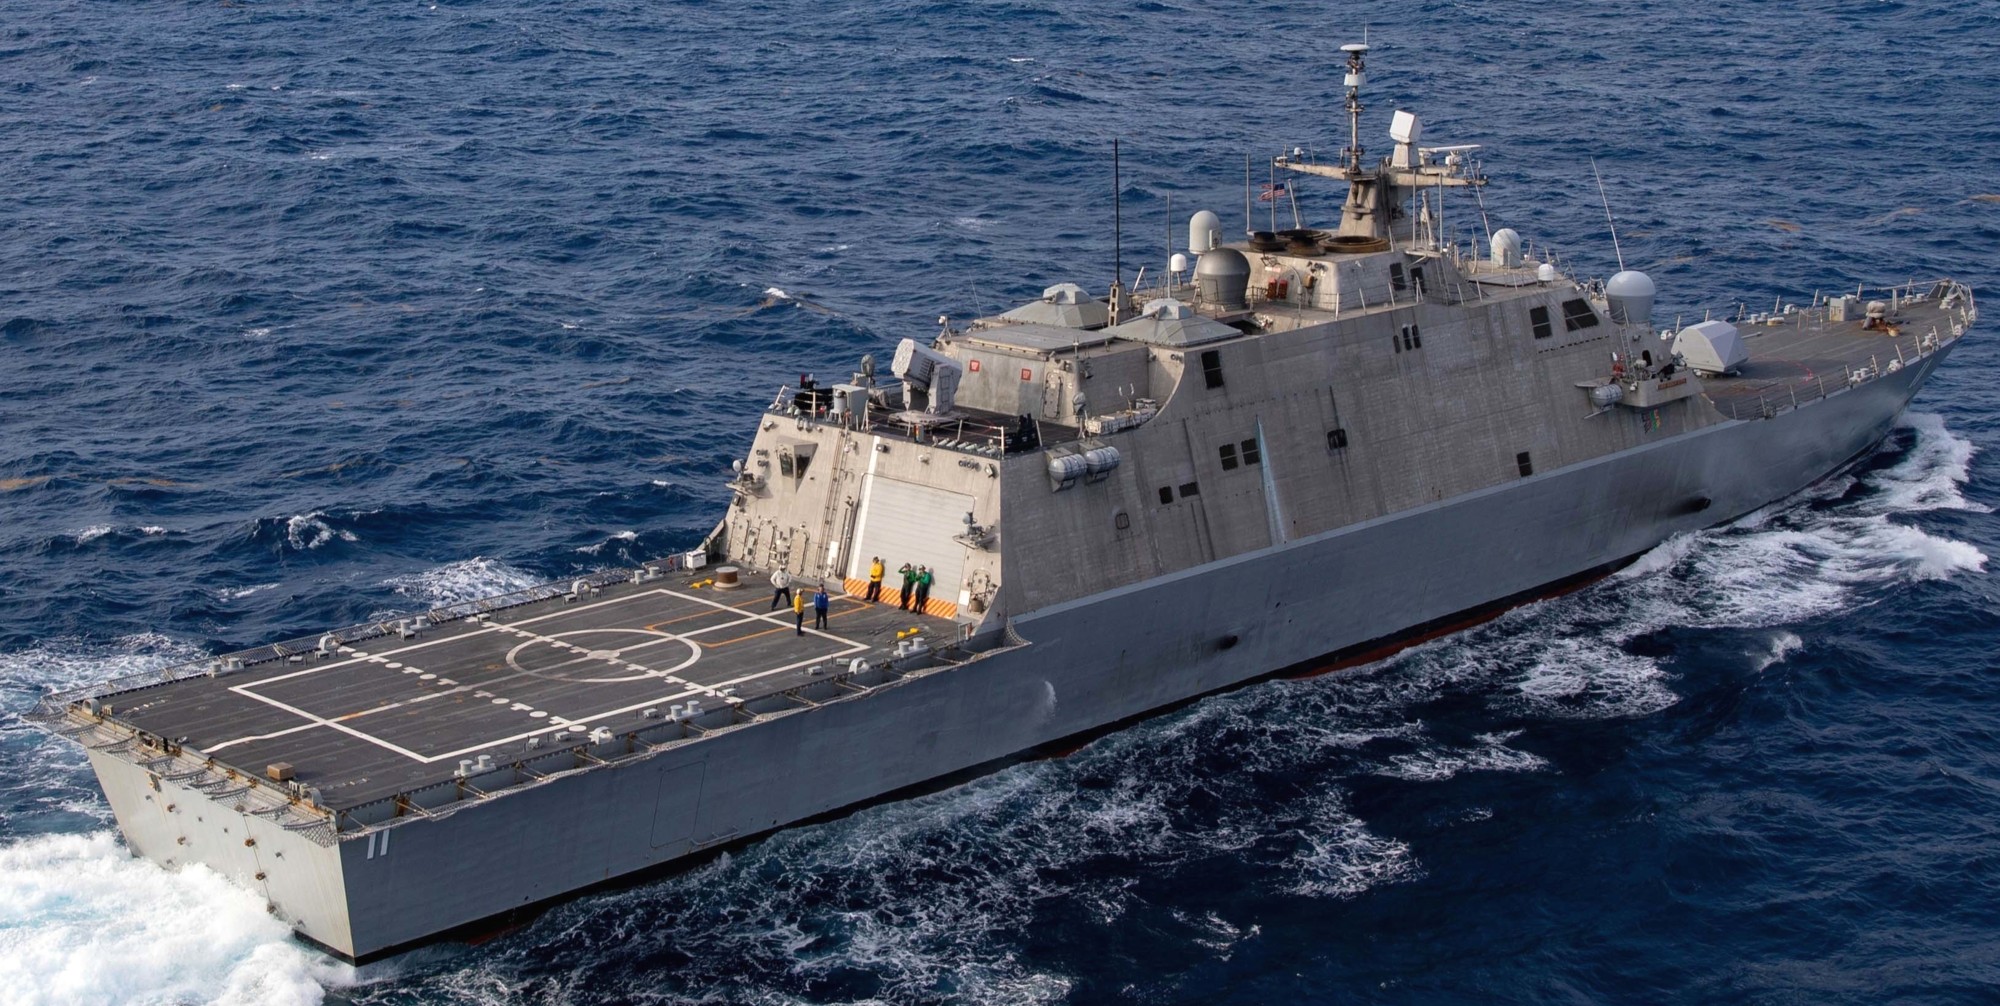 lcs-11 uss sioux city freedom class littoral combat ship us navy caribbean 69